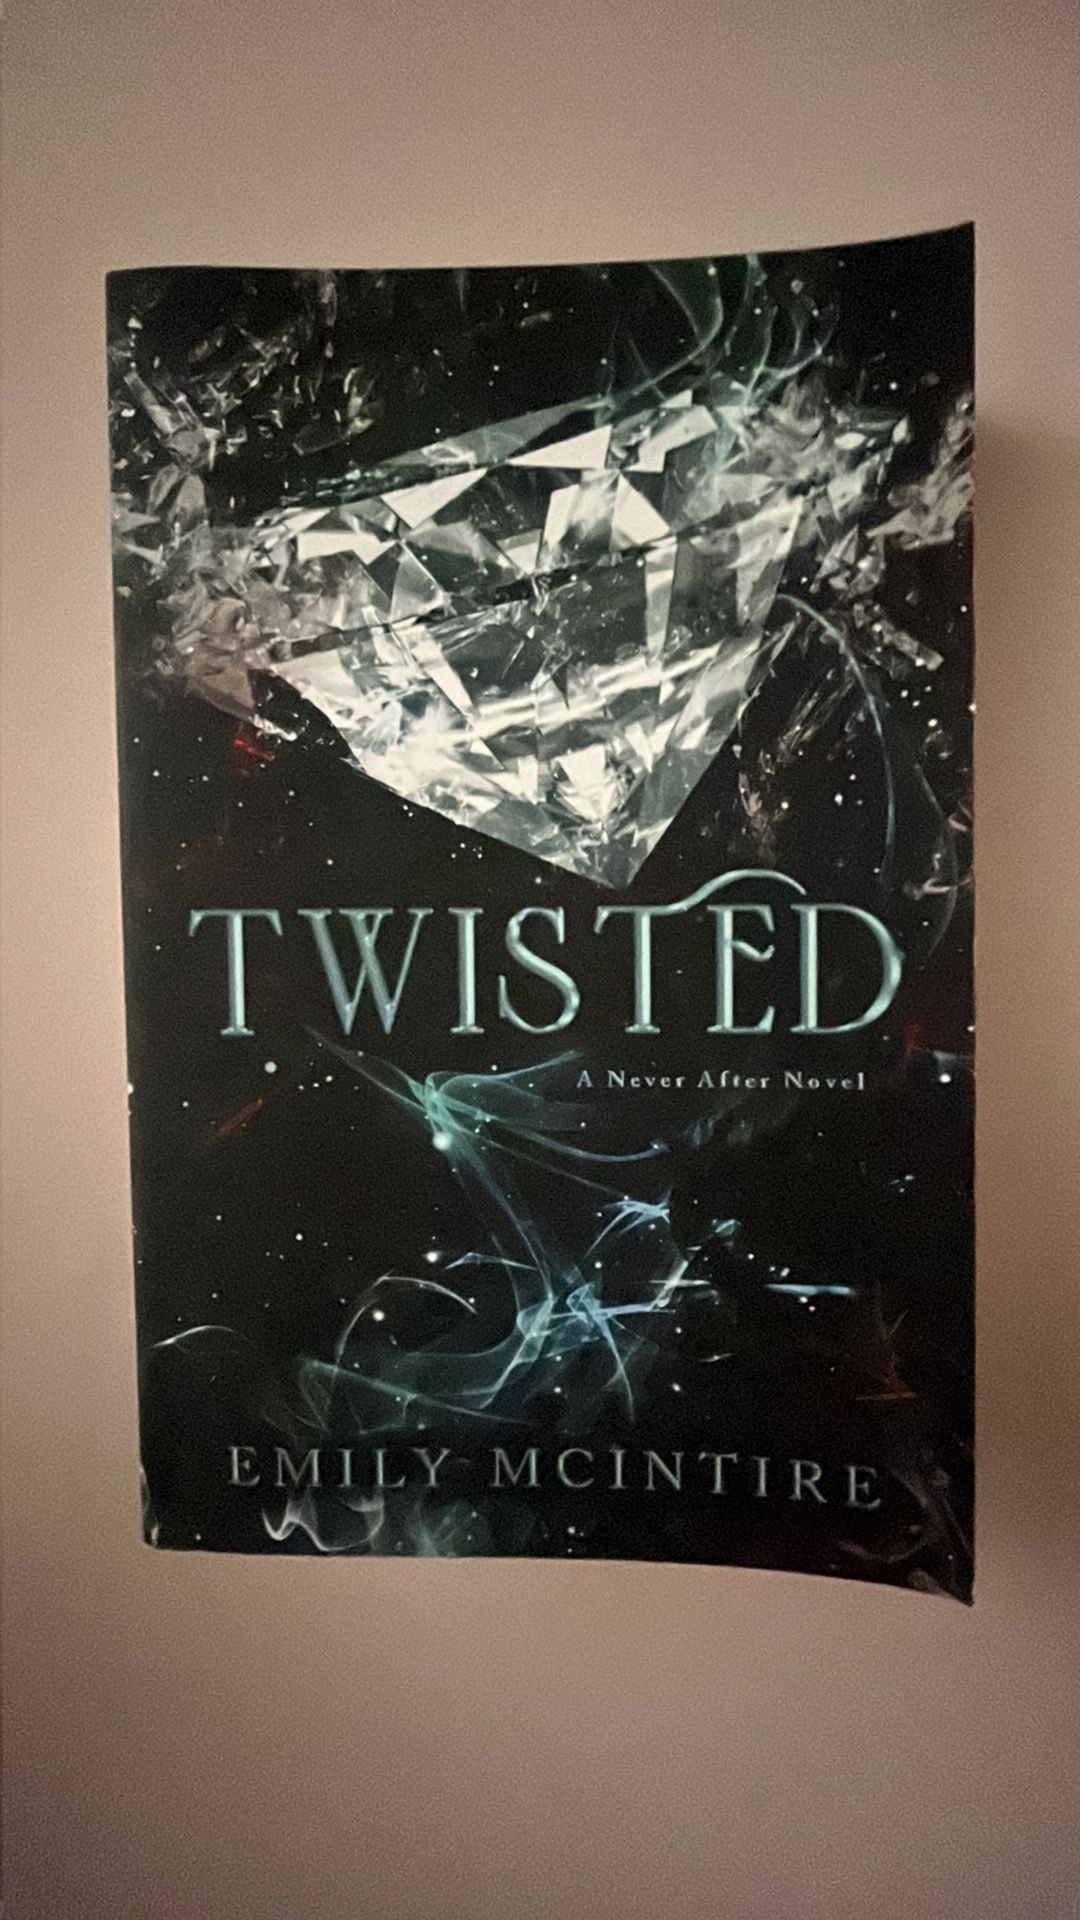 Twisted by Emily Mcintire 